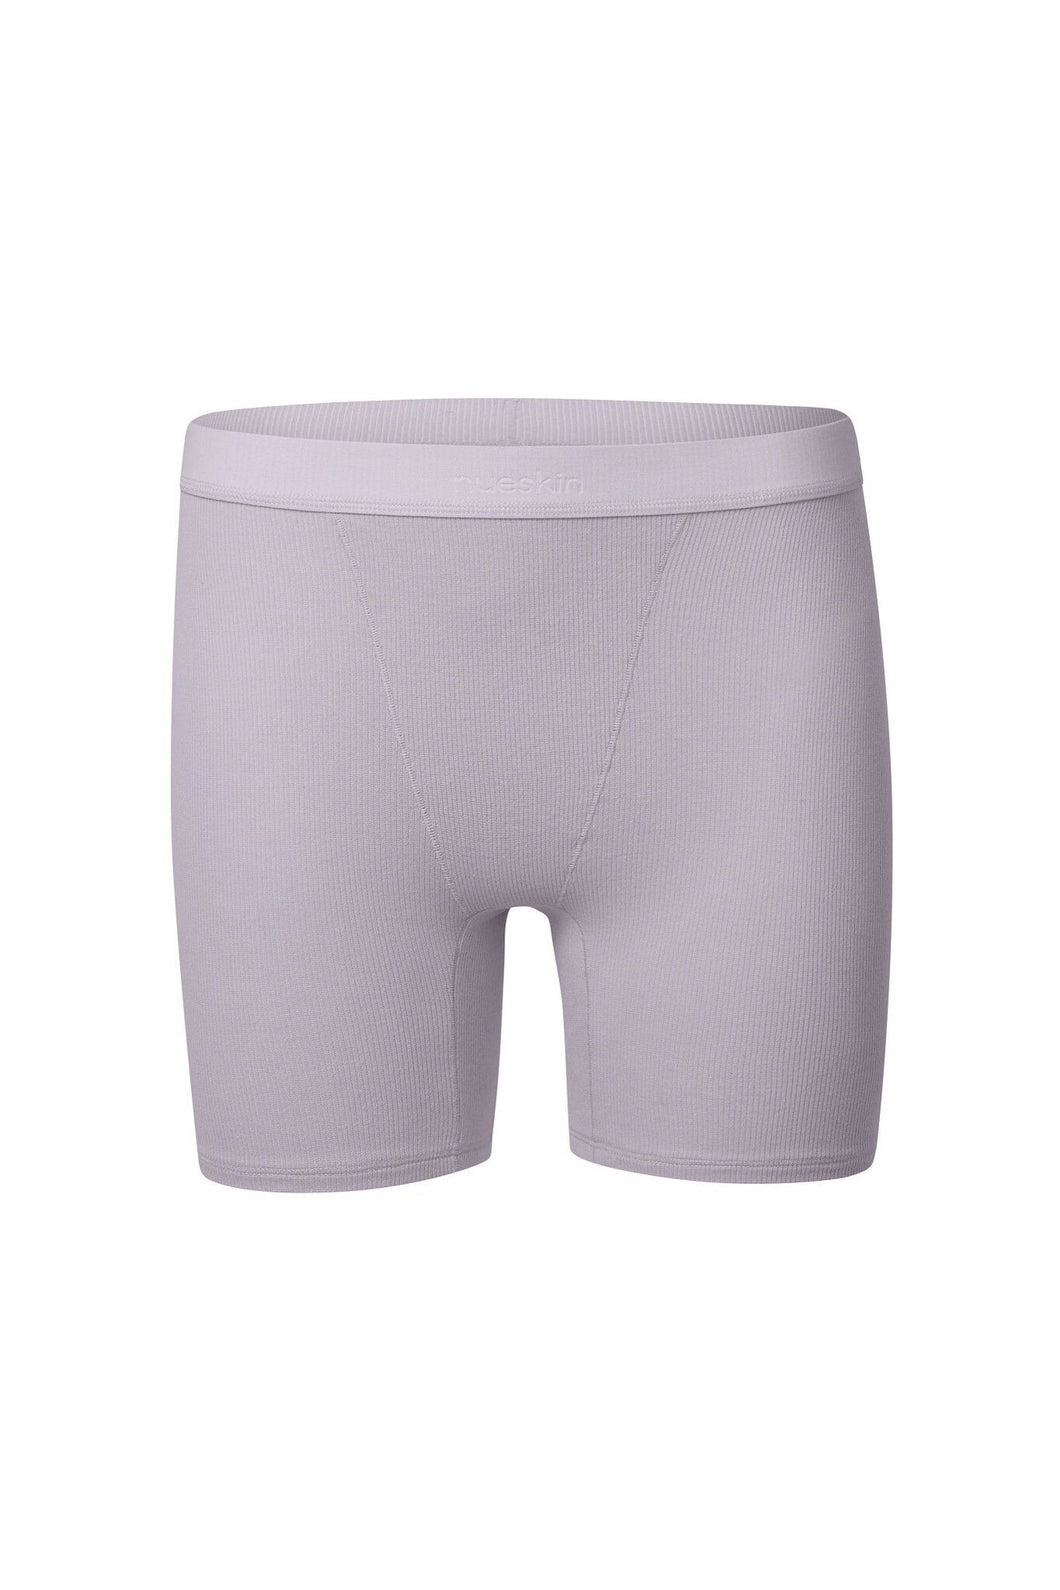 nueskin Hena Rib Cotton Shorts in color Orchid Hush and shape shortie